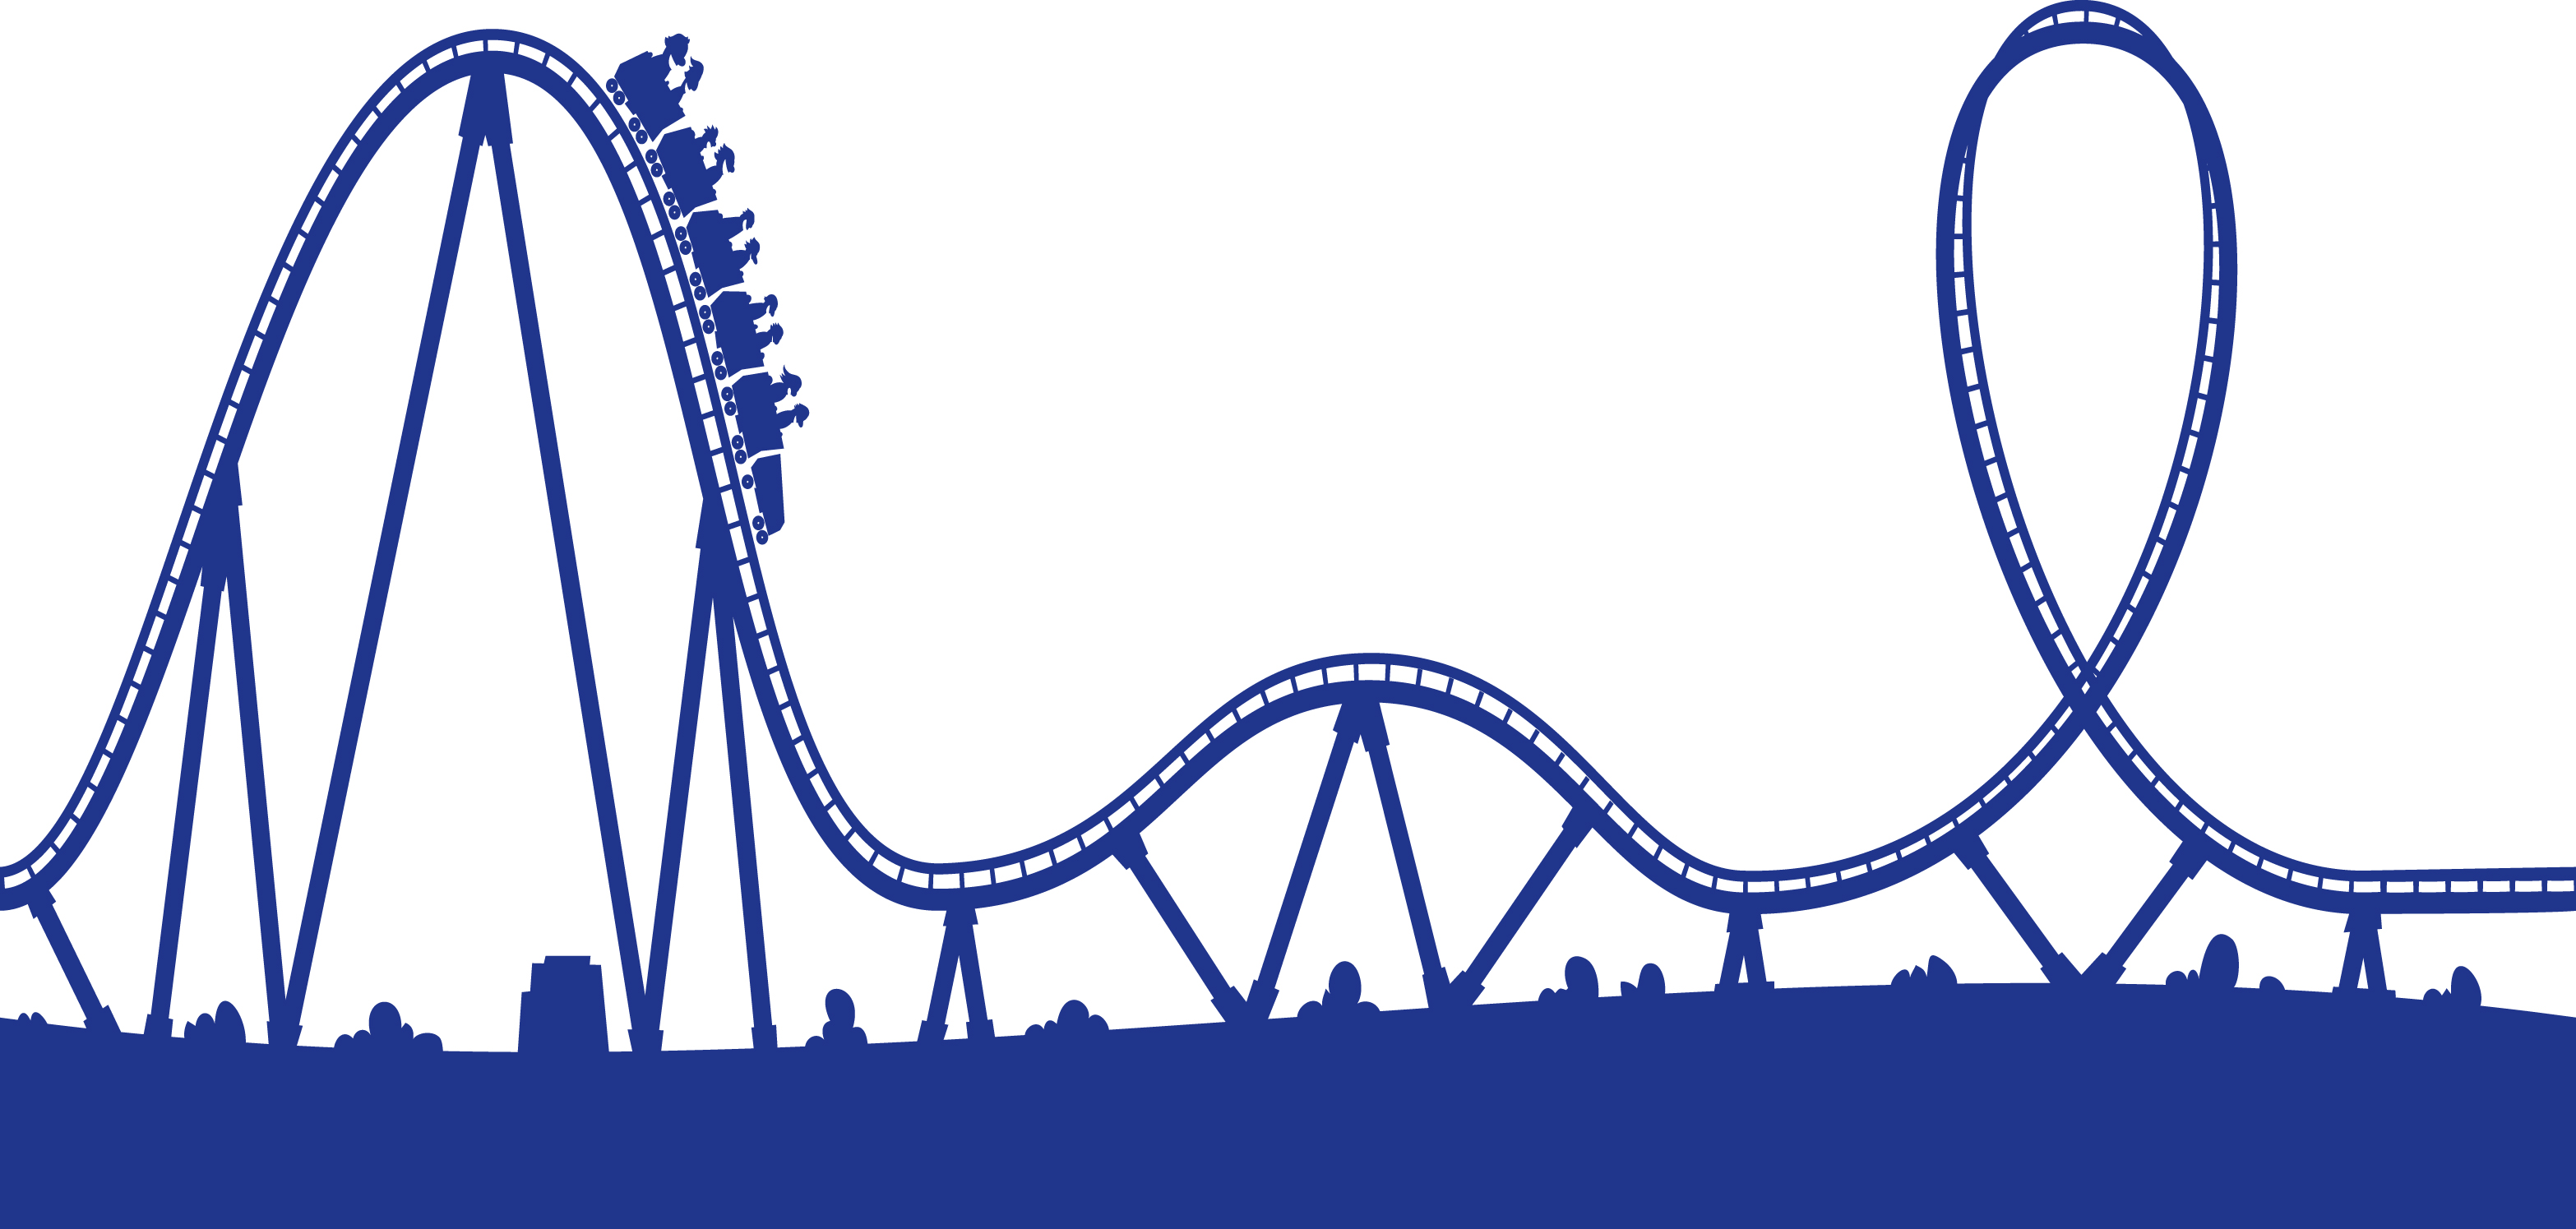 Roller Coaster Track Clipart | Clipart Panda - Free Clipart Images